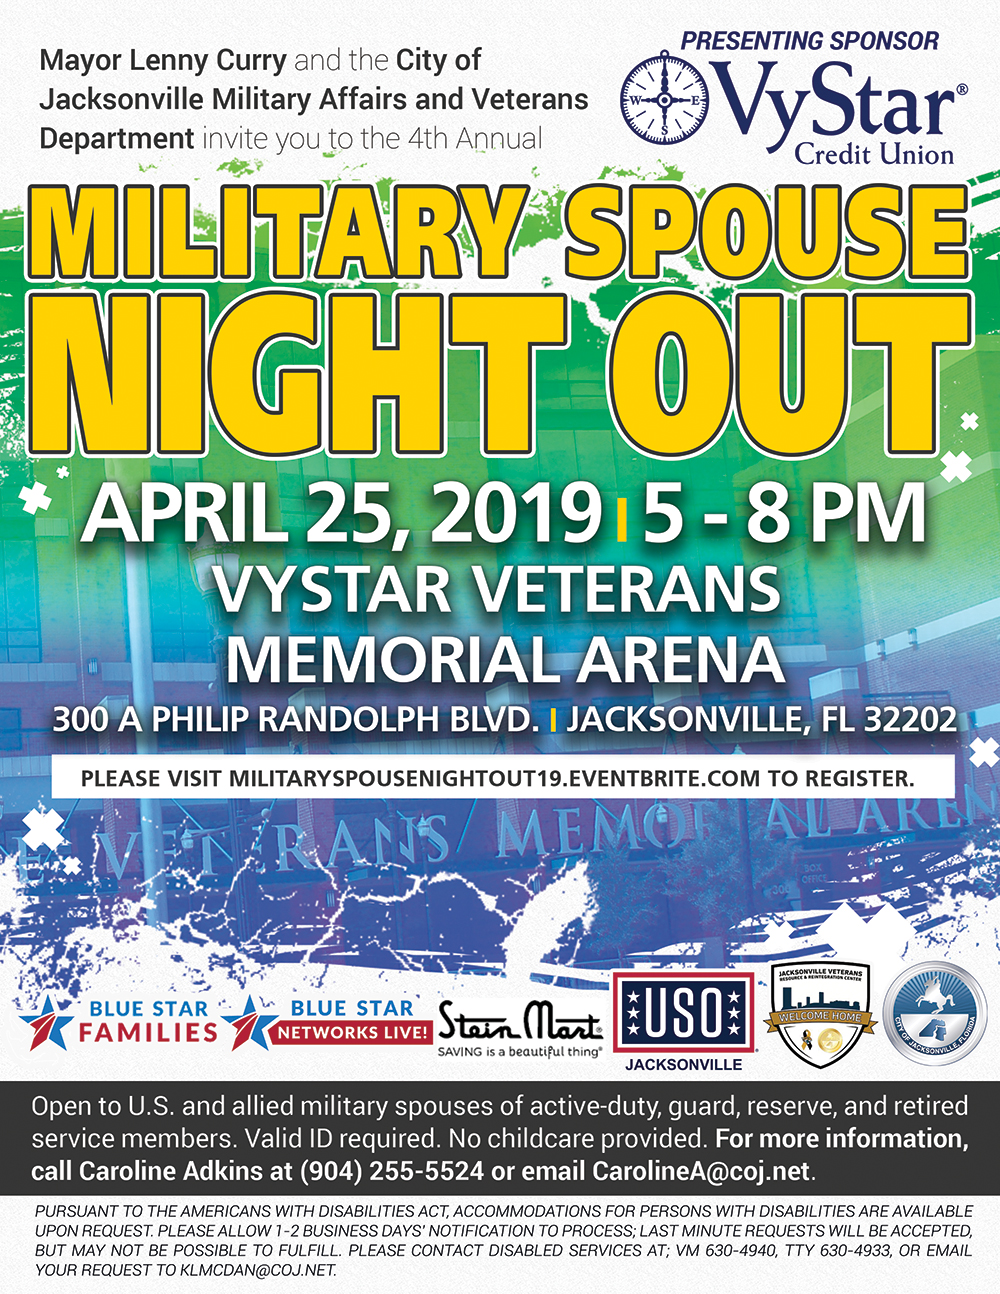 The 4th Annual Military Spouse Night Out presented by VyStar Credit Union will be on Thursday, April 25th, 2019 at the VyStar Veterans Memorial Arena. 